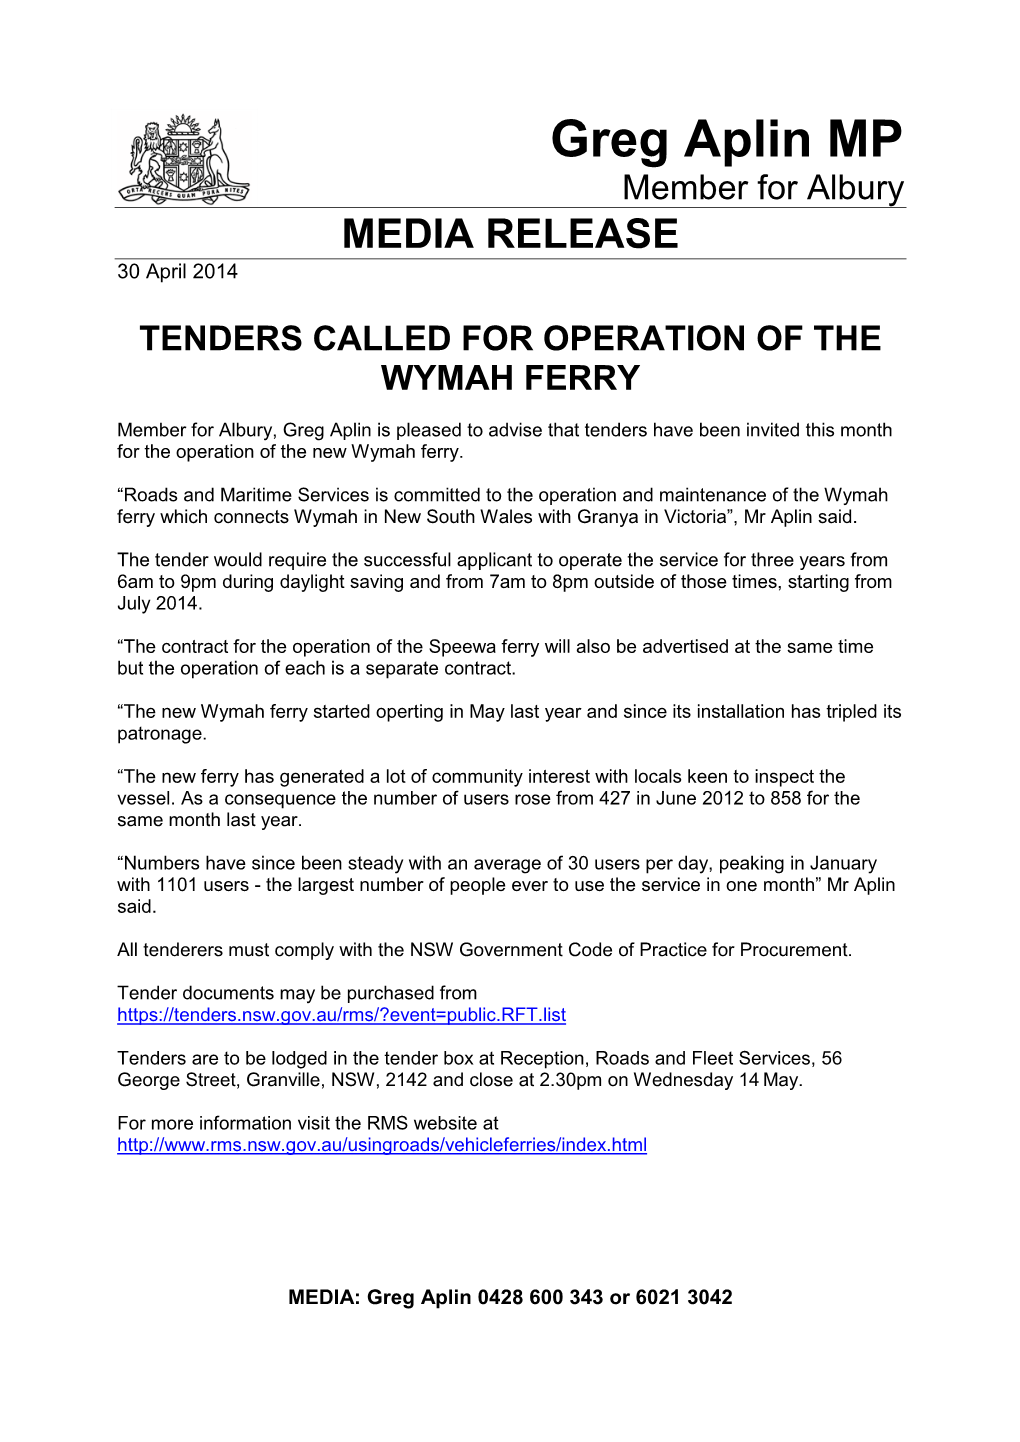 Tenders Called for Operation of the Wymah Ferry